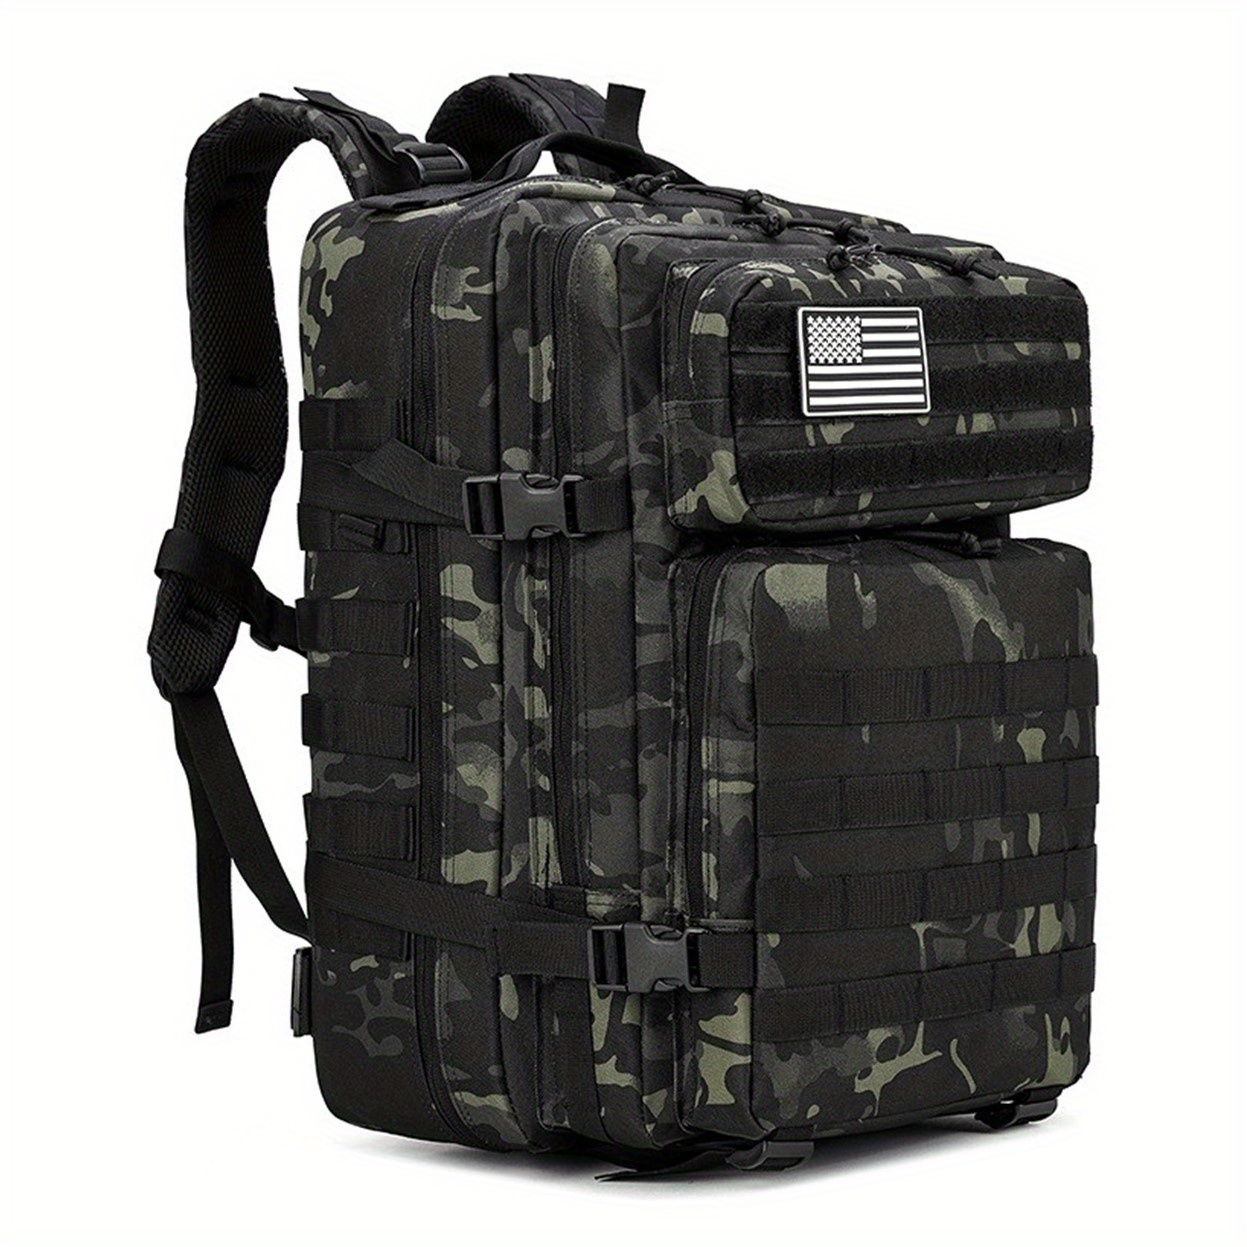 Waterproof 12L Tactical Military Molle Backpack For Outdoor Sports